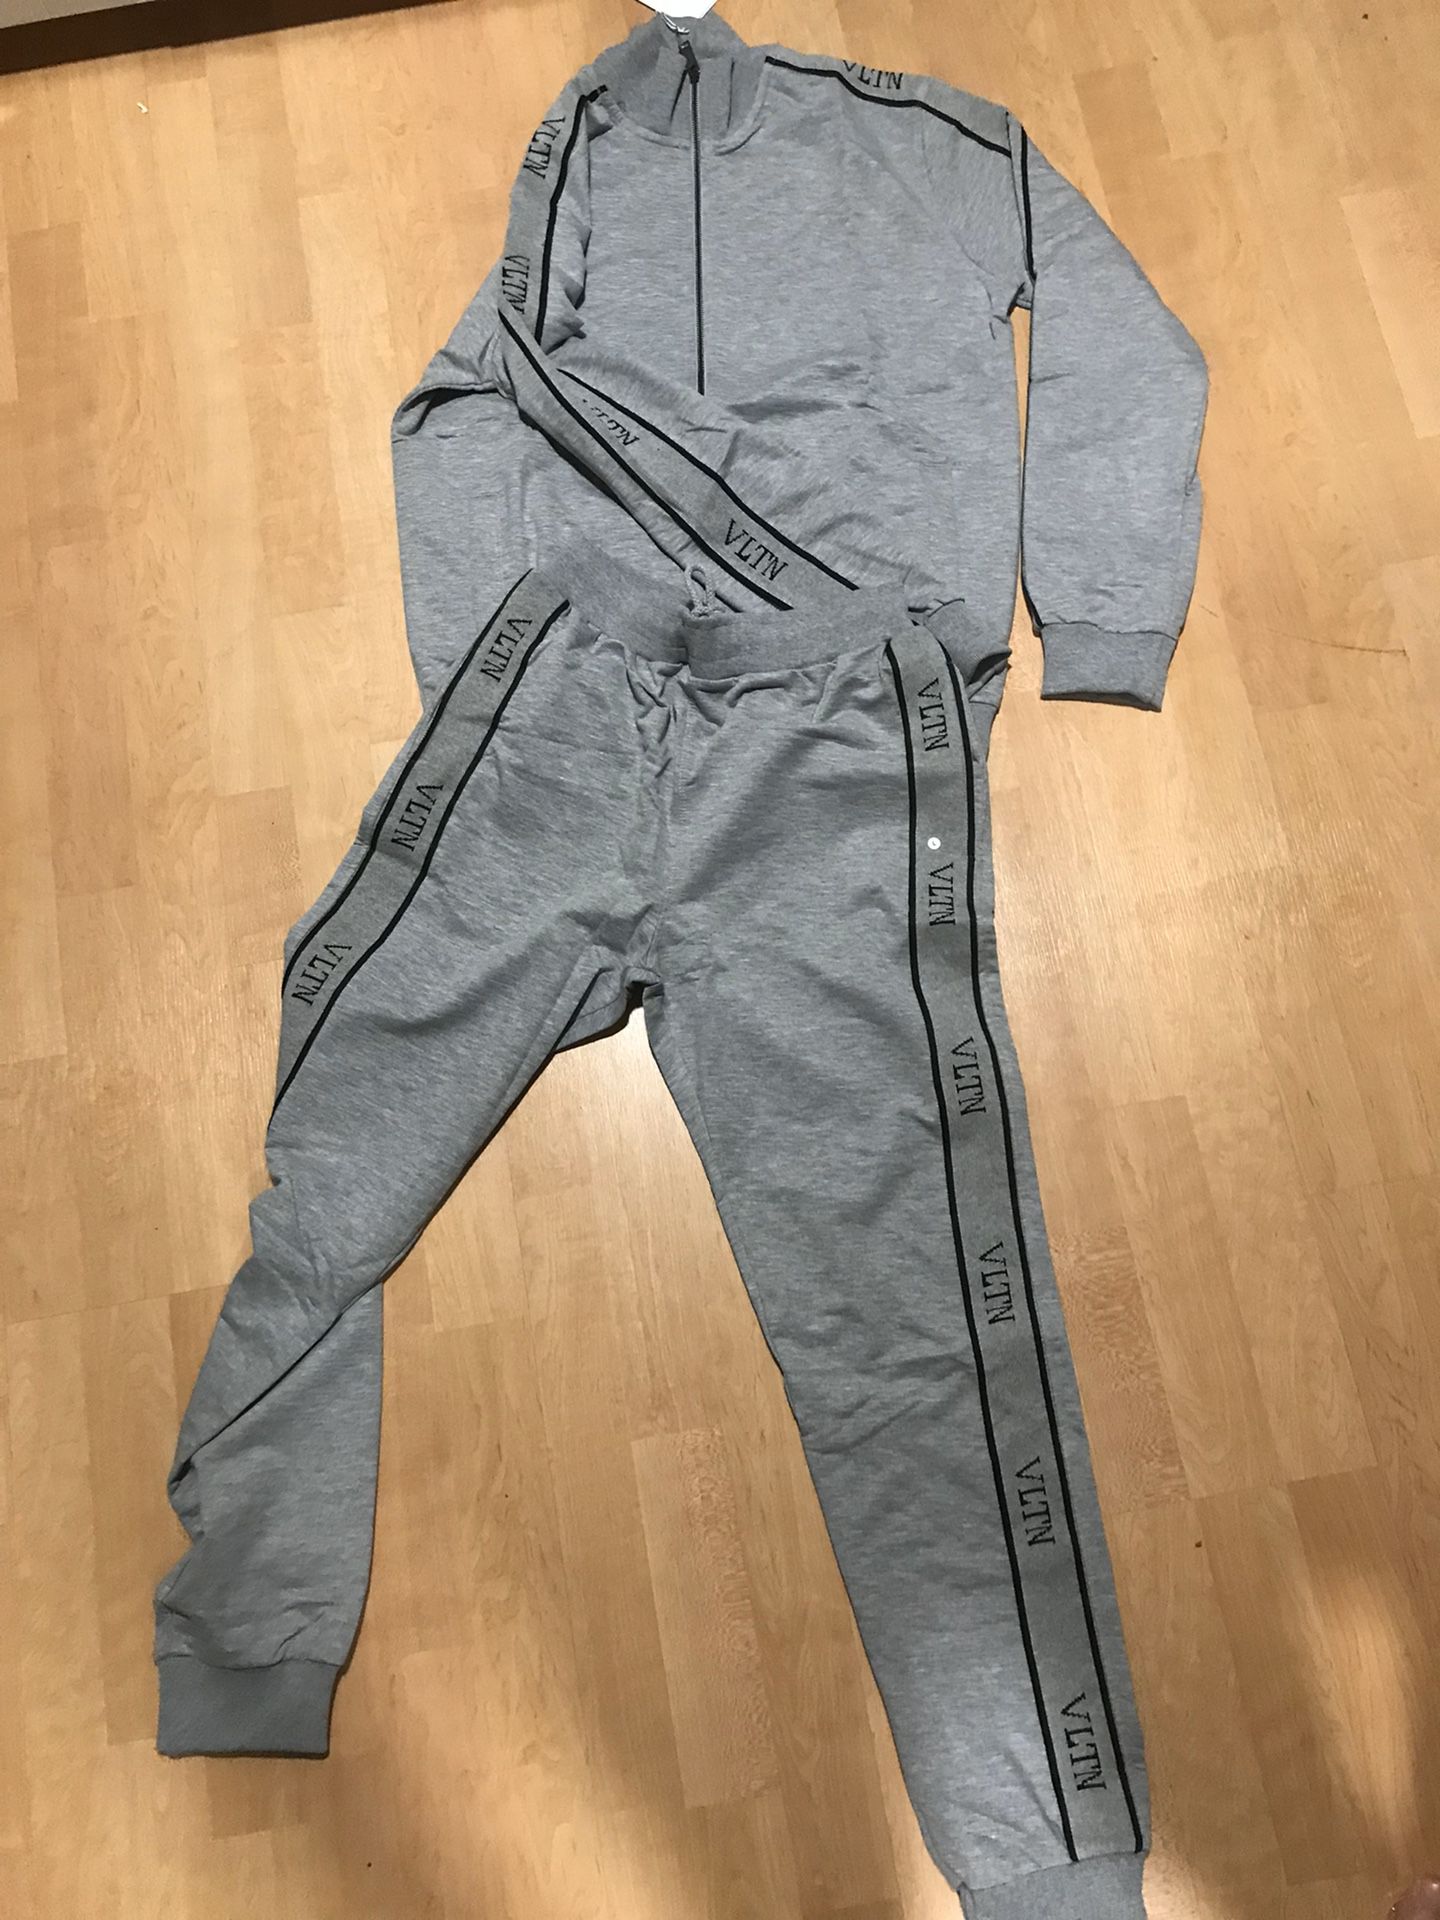 Brand new valentino tracksuit with pants and jacket